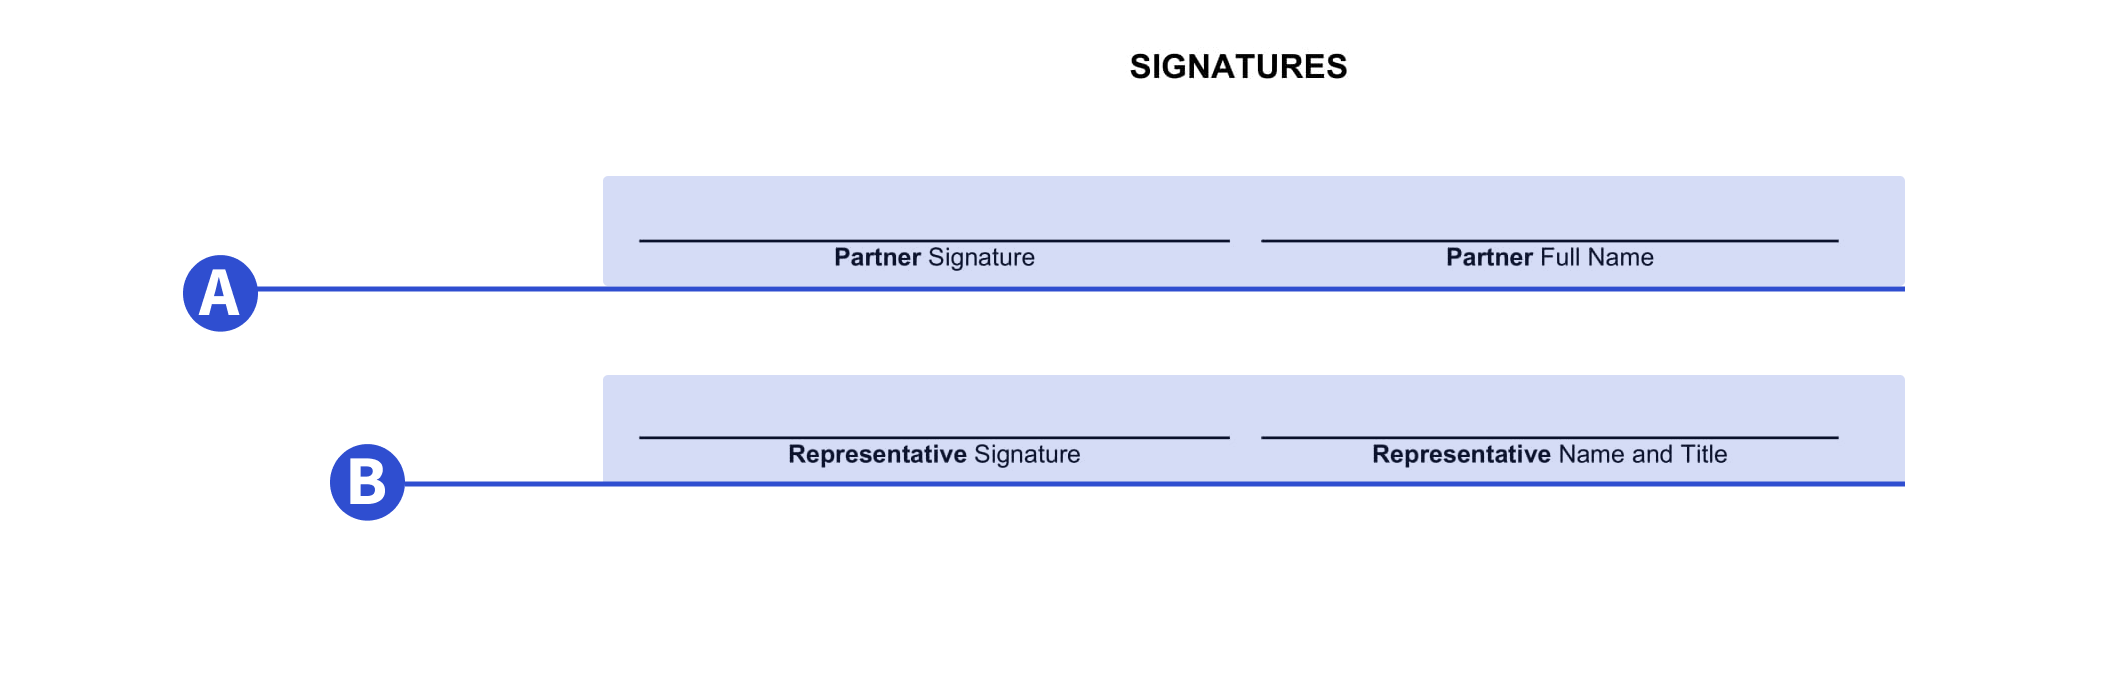 Where to include signatures in our partnership agreement template.